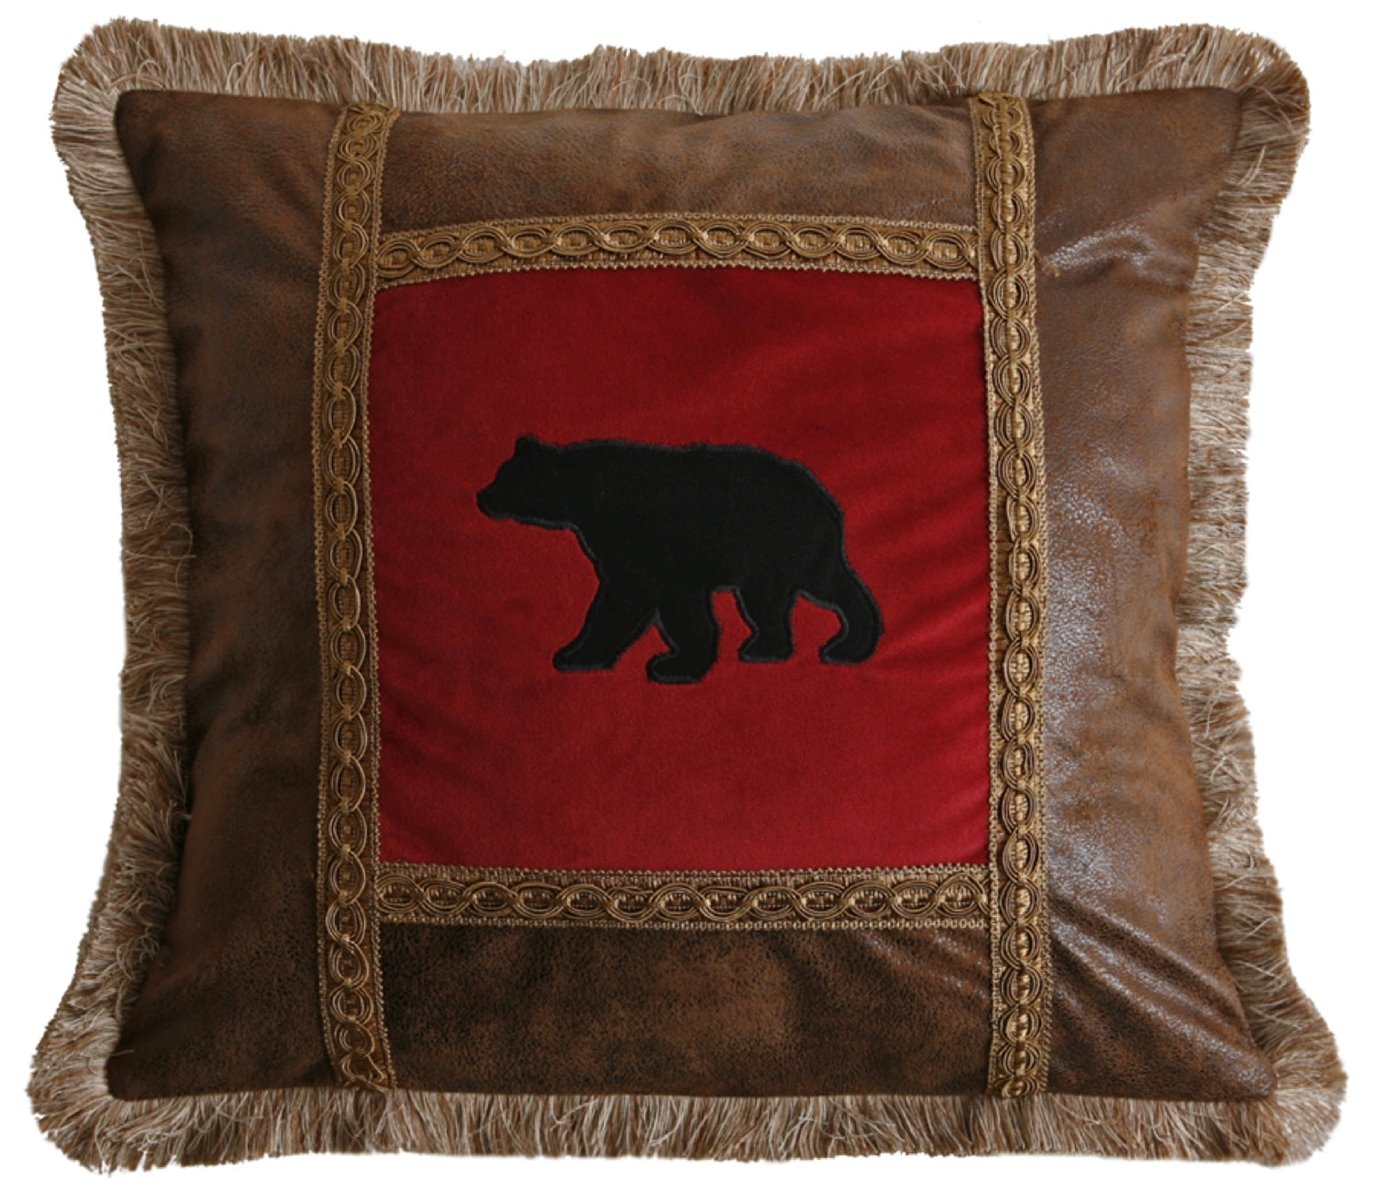 Carstens Applique Bear Faux Leather Throw Pillow 18" x 18"